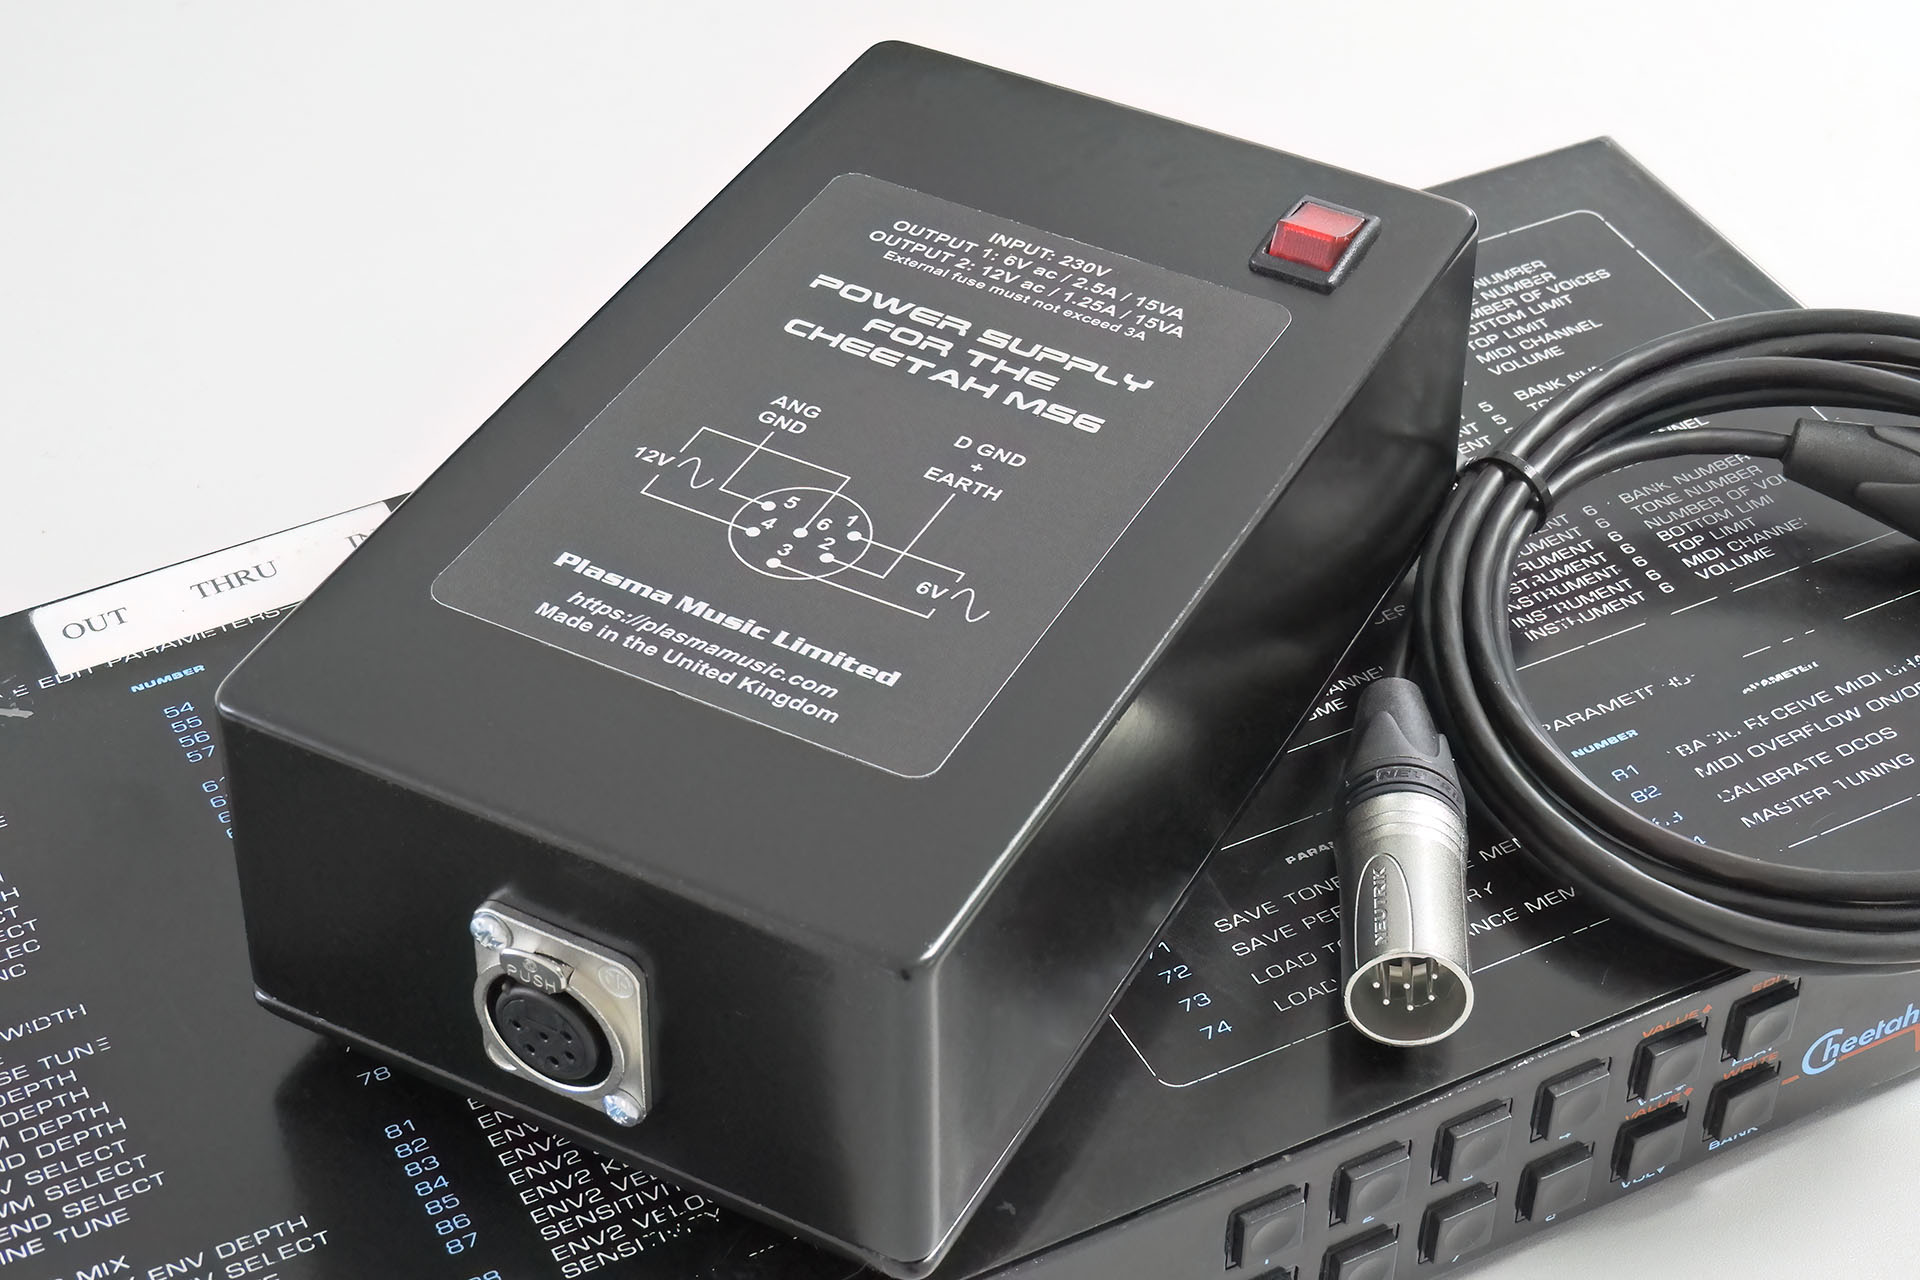 External power supply for Cheetah MS6 in black